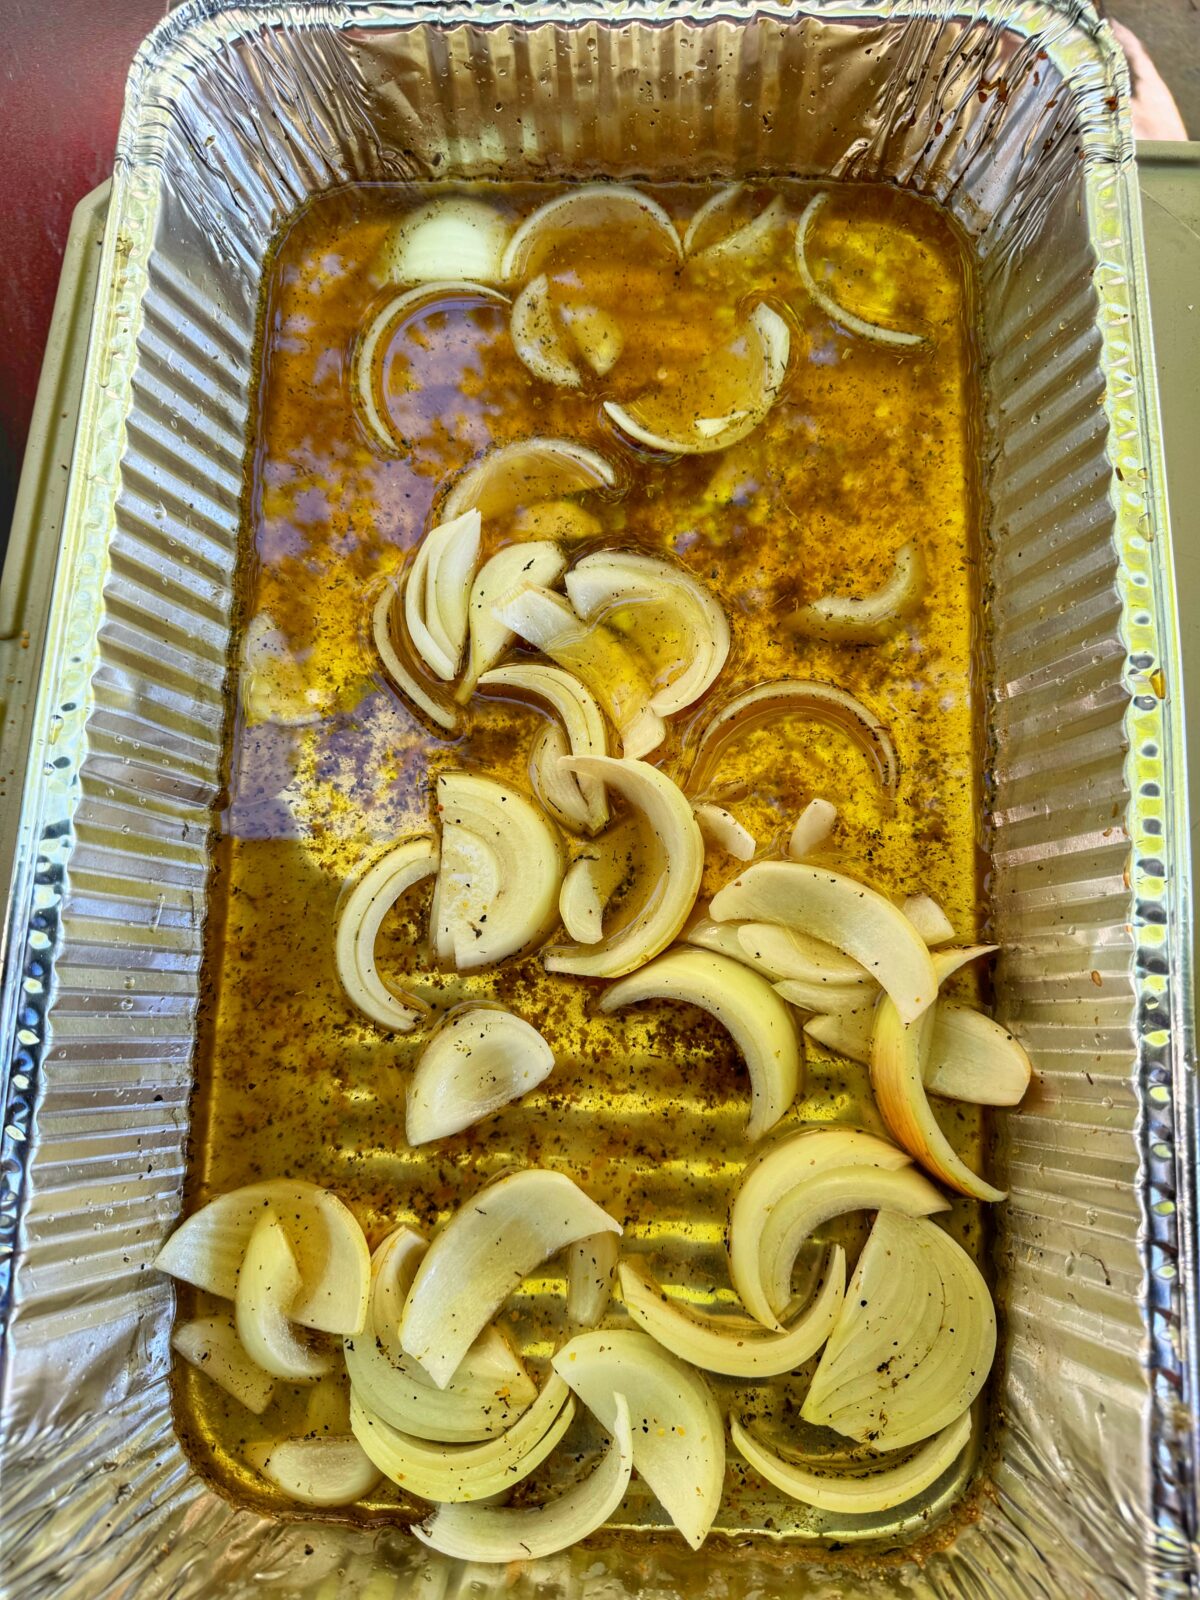 A pan of braise liquid and onions.